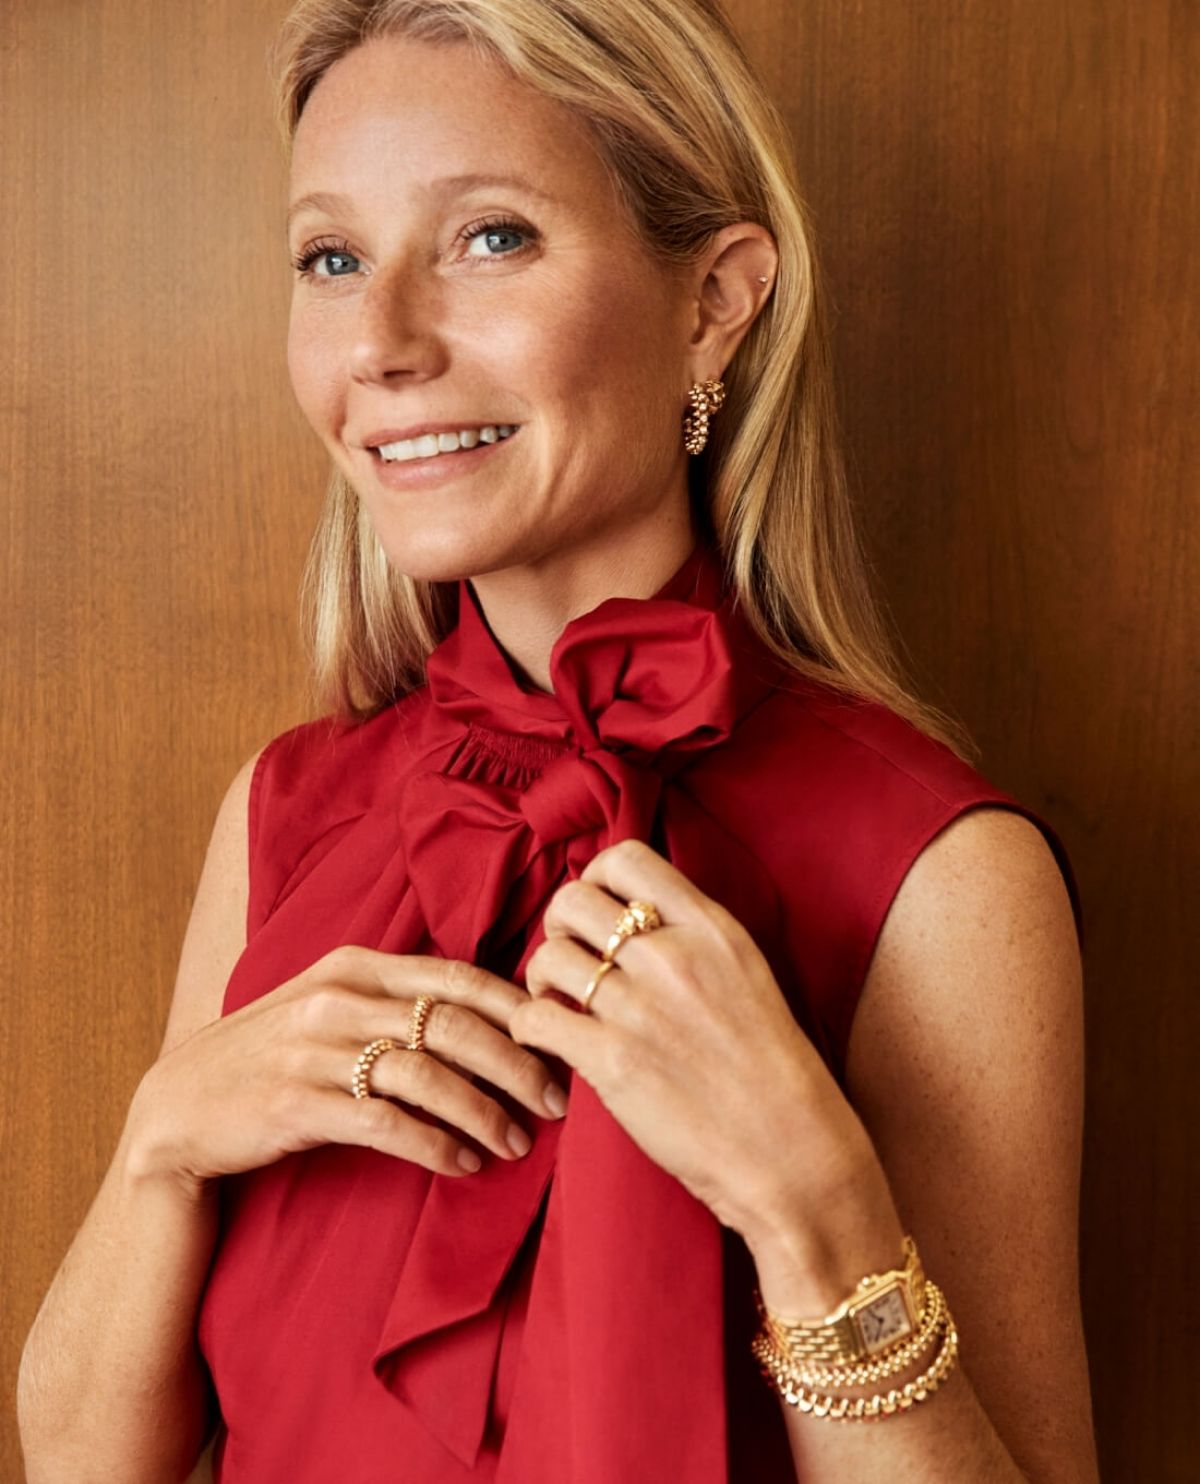 GWYNETH PALTROW for Goop G. Label Core Collection, October 2021